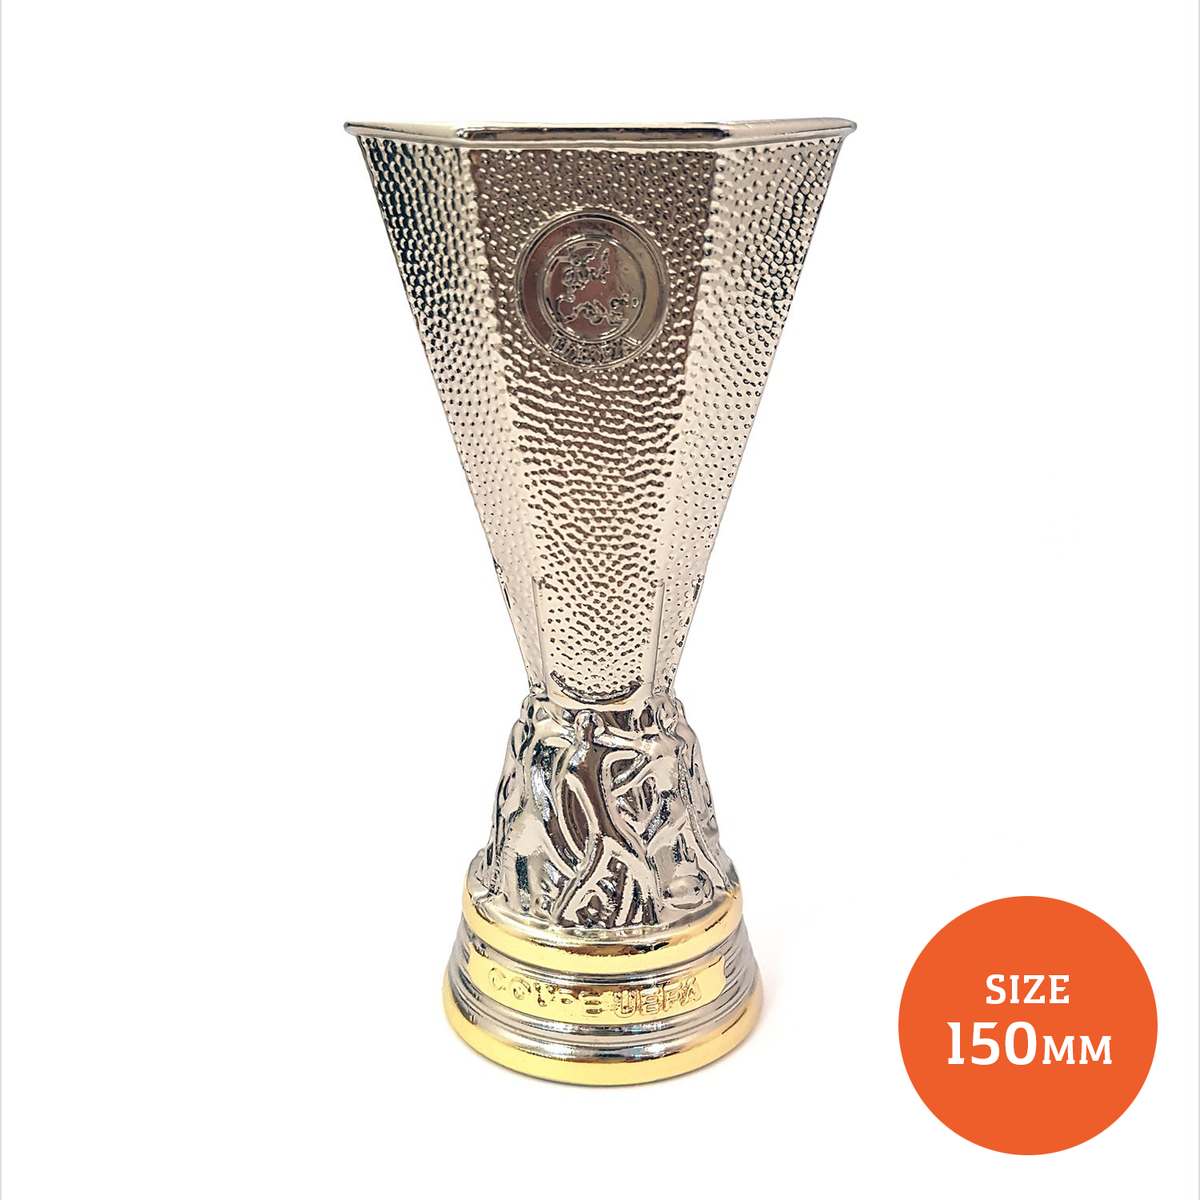 UEFA Europa League 150mm 3D Replica Trophy UEFA Club Competitions Online Store